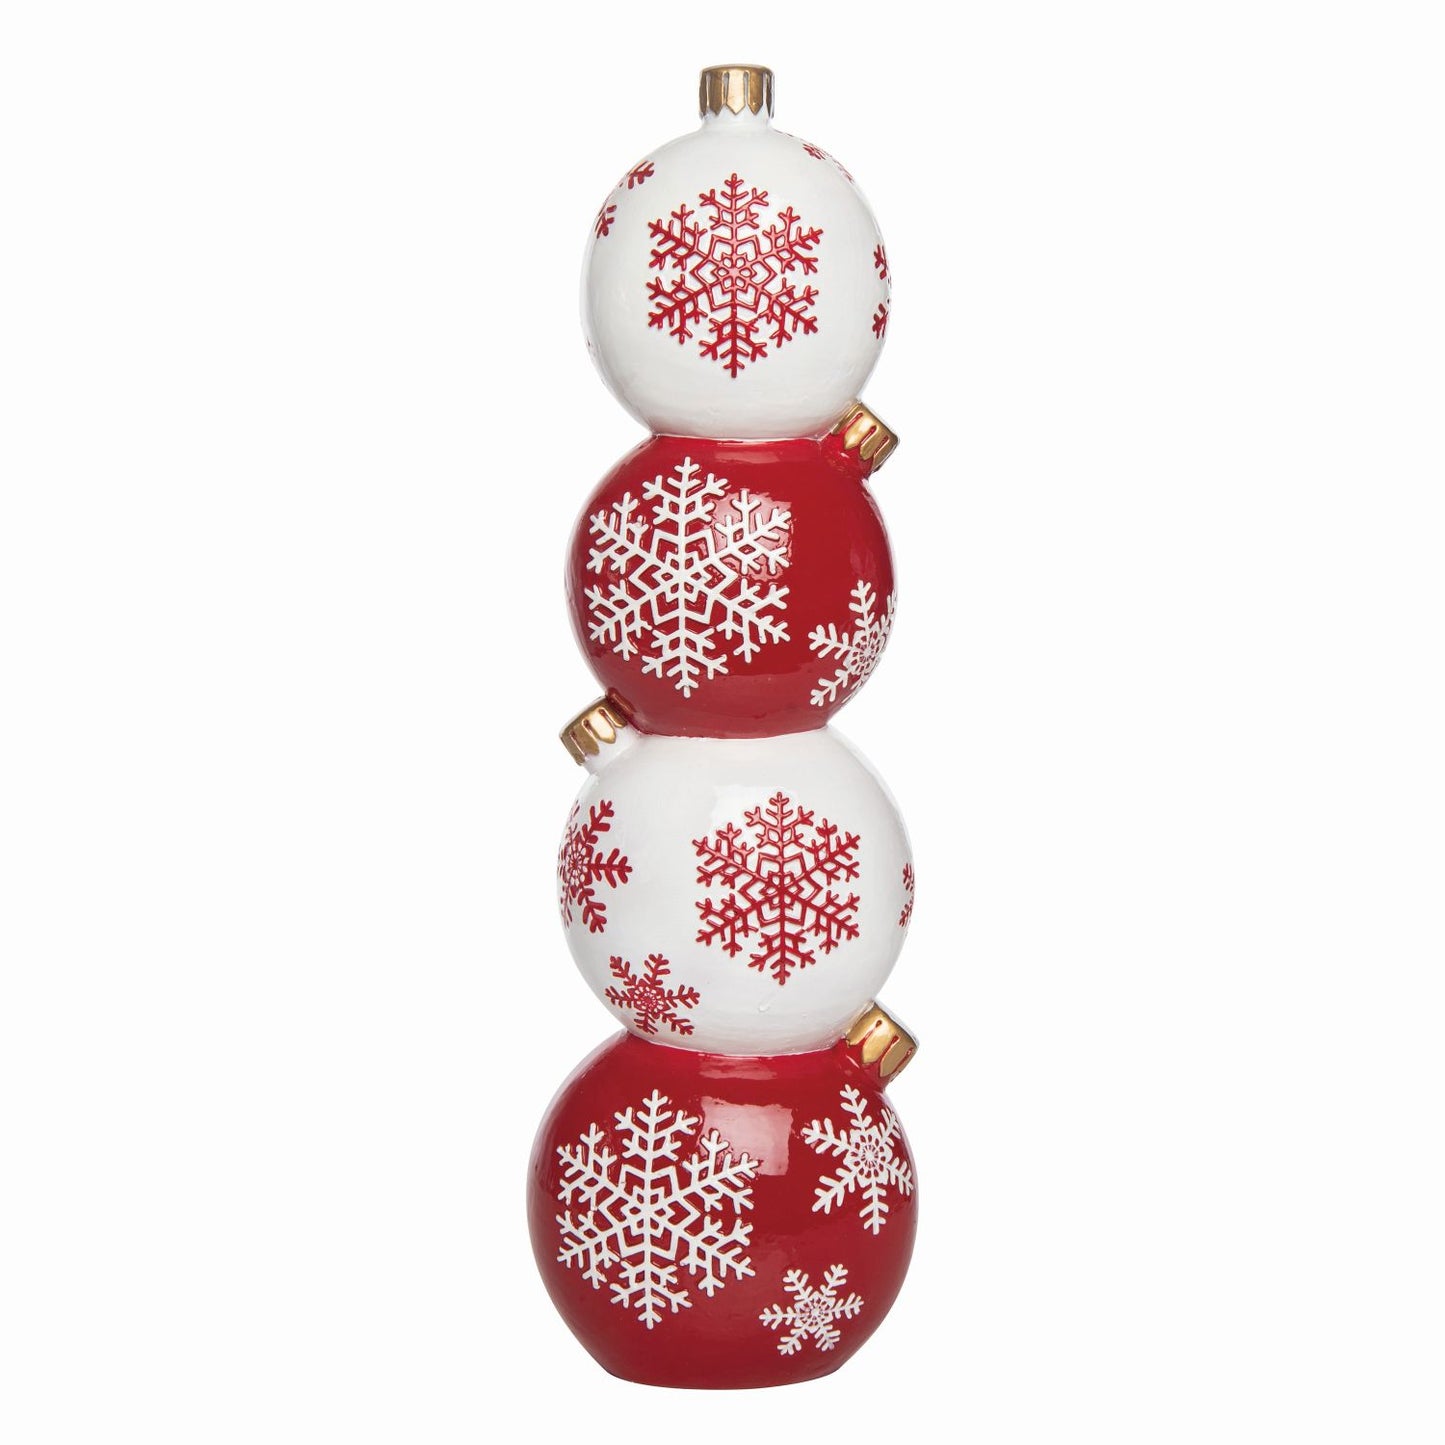 Transpac Resin Stacked Ornament Decor